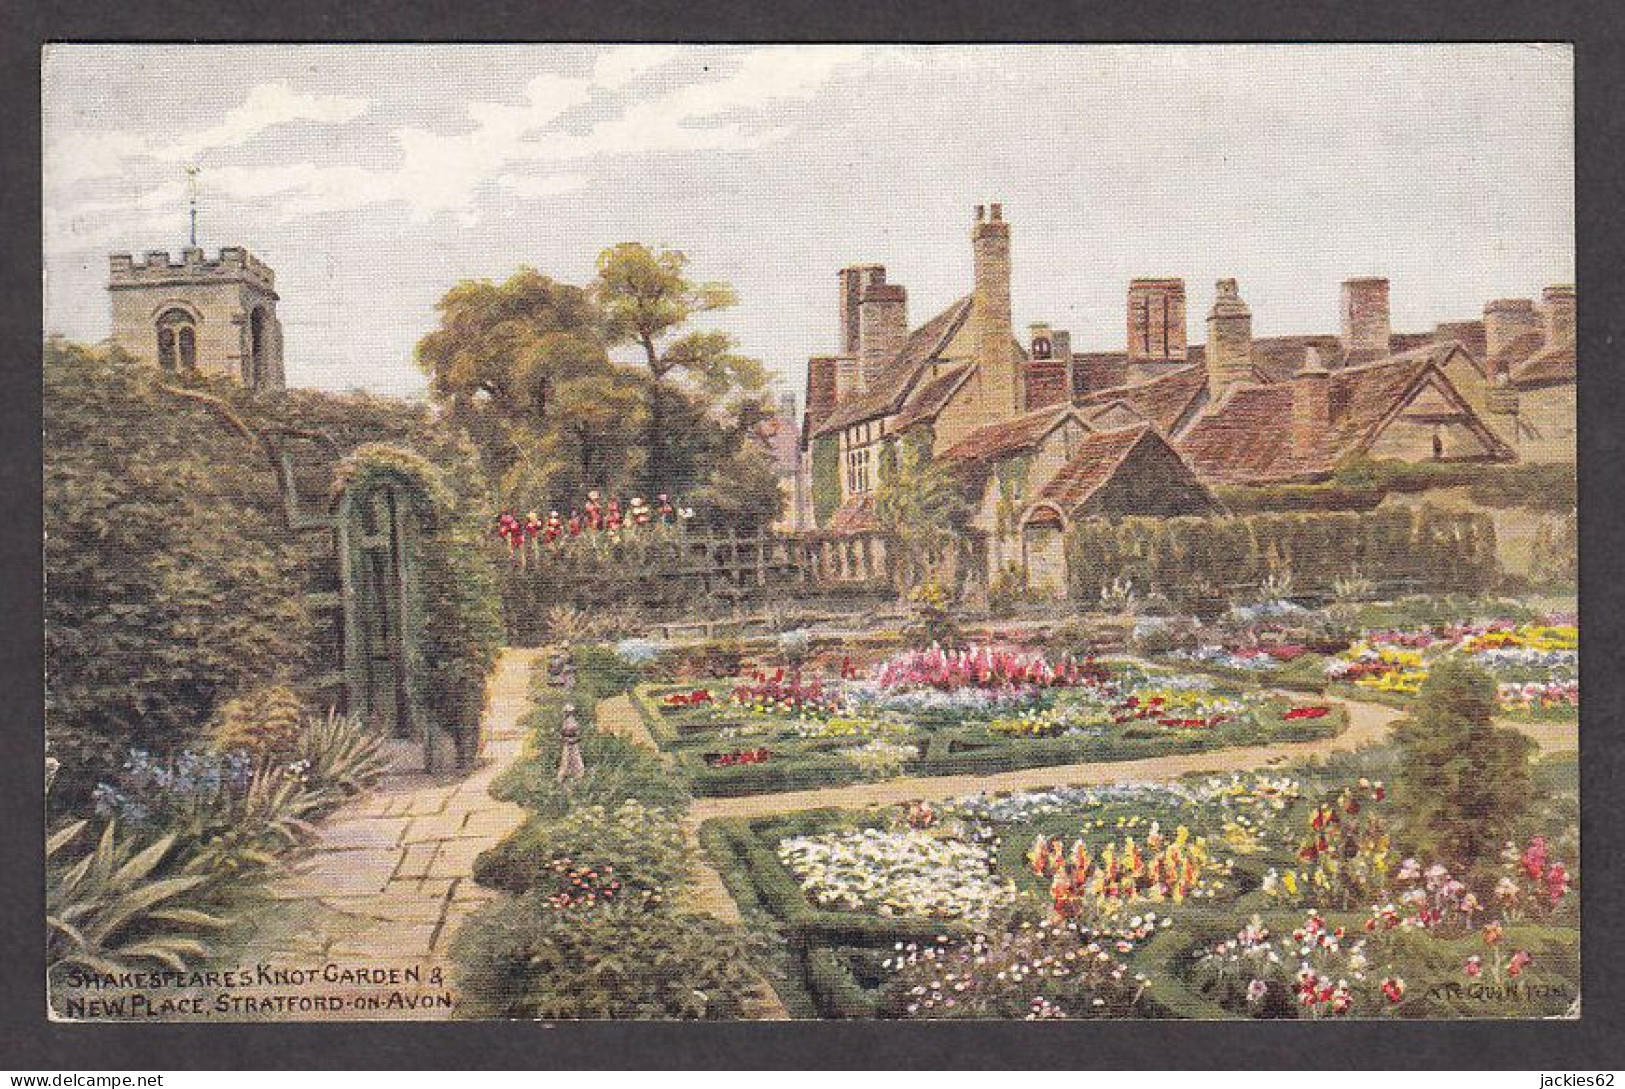 PQ104/ Alfred Robert QUINTON, *Shakespeares Knot Garden At Newplace, Stratford-on-Avon* - Paintings